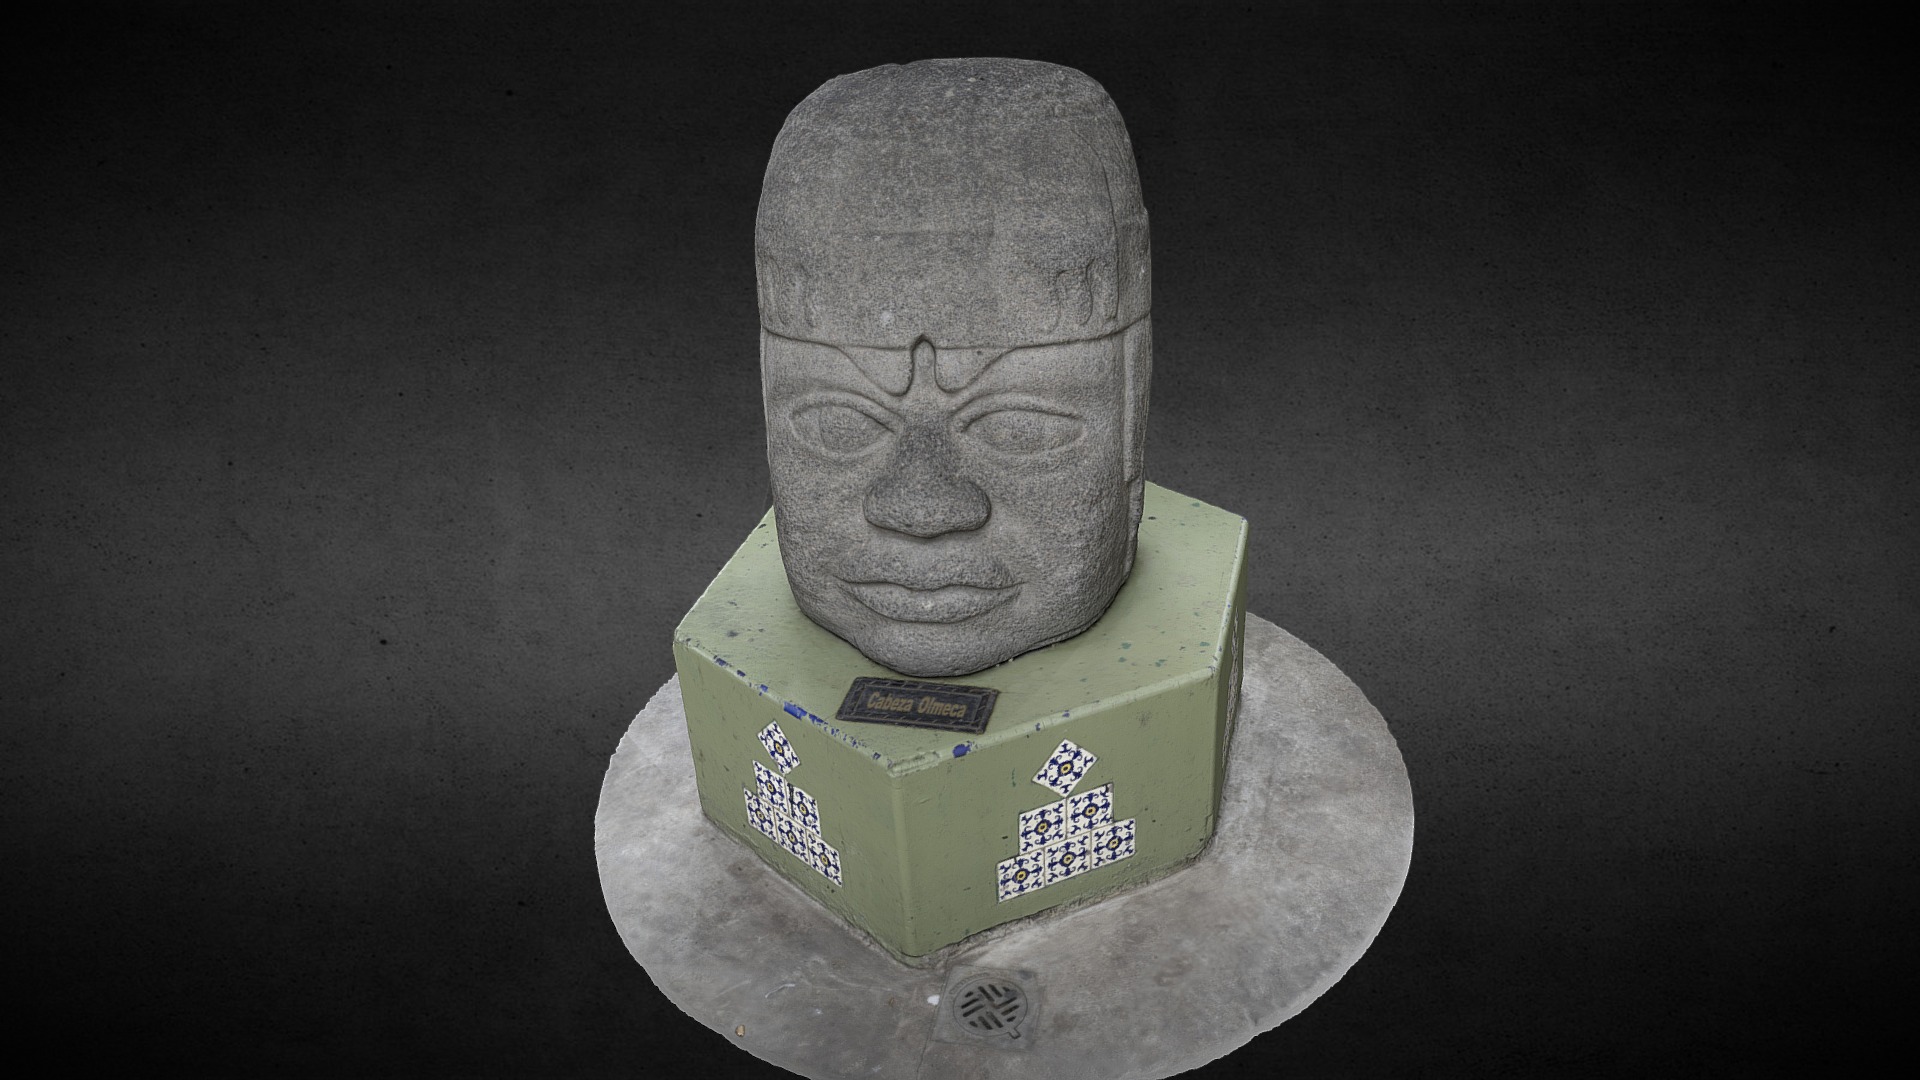 3D model Olmec Head – Tijuana Mexico - This is a 3D model of the Olmec Head - Tijuana Mexico. The 3D model is about a statue of a person.